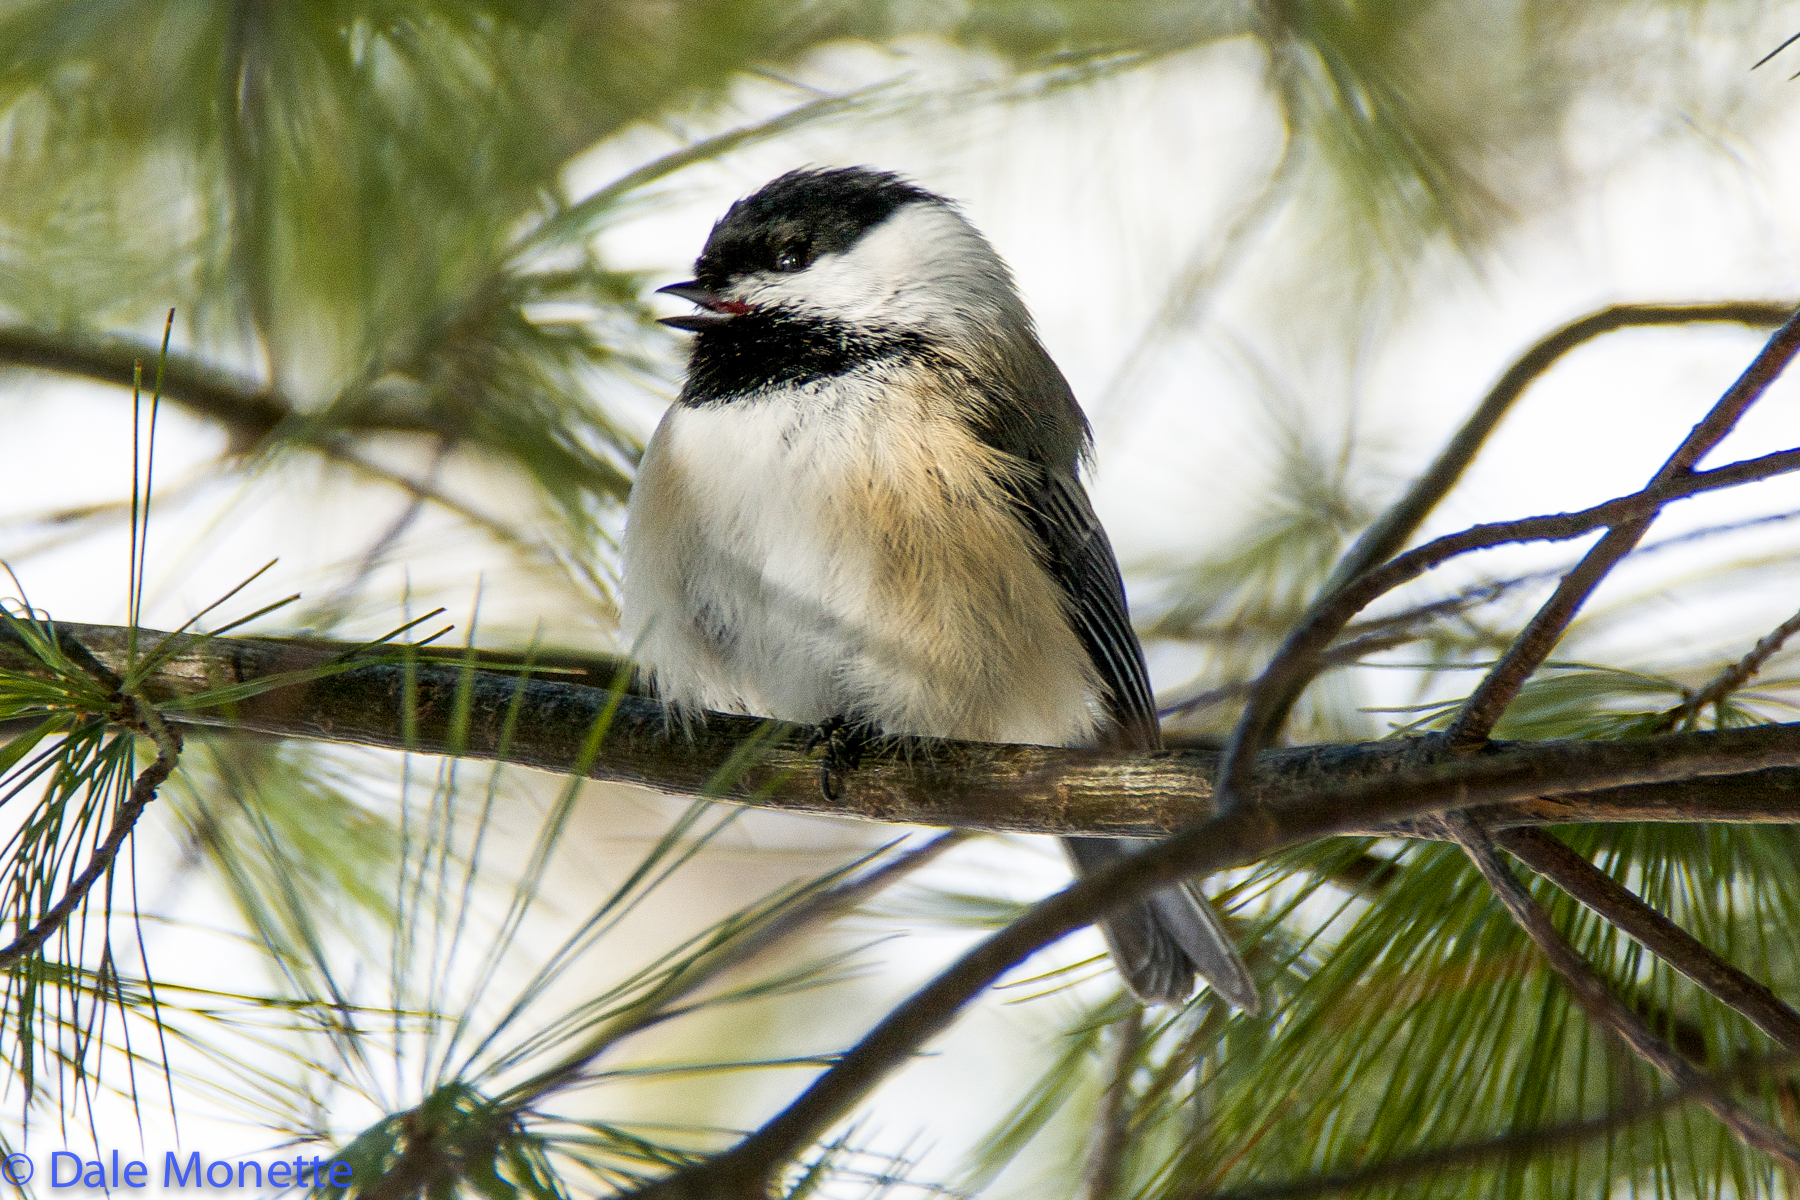 Black capped chickadee singing its "spring" feee beee song